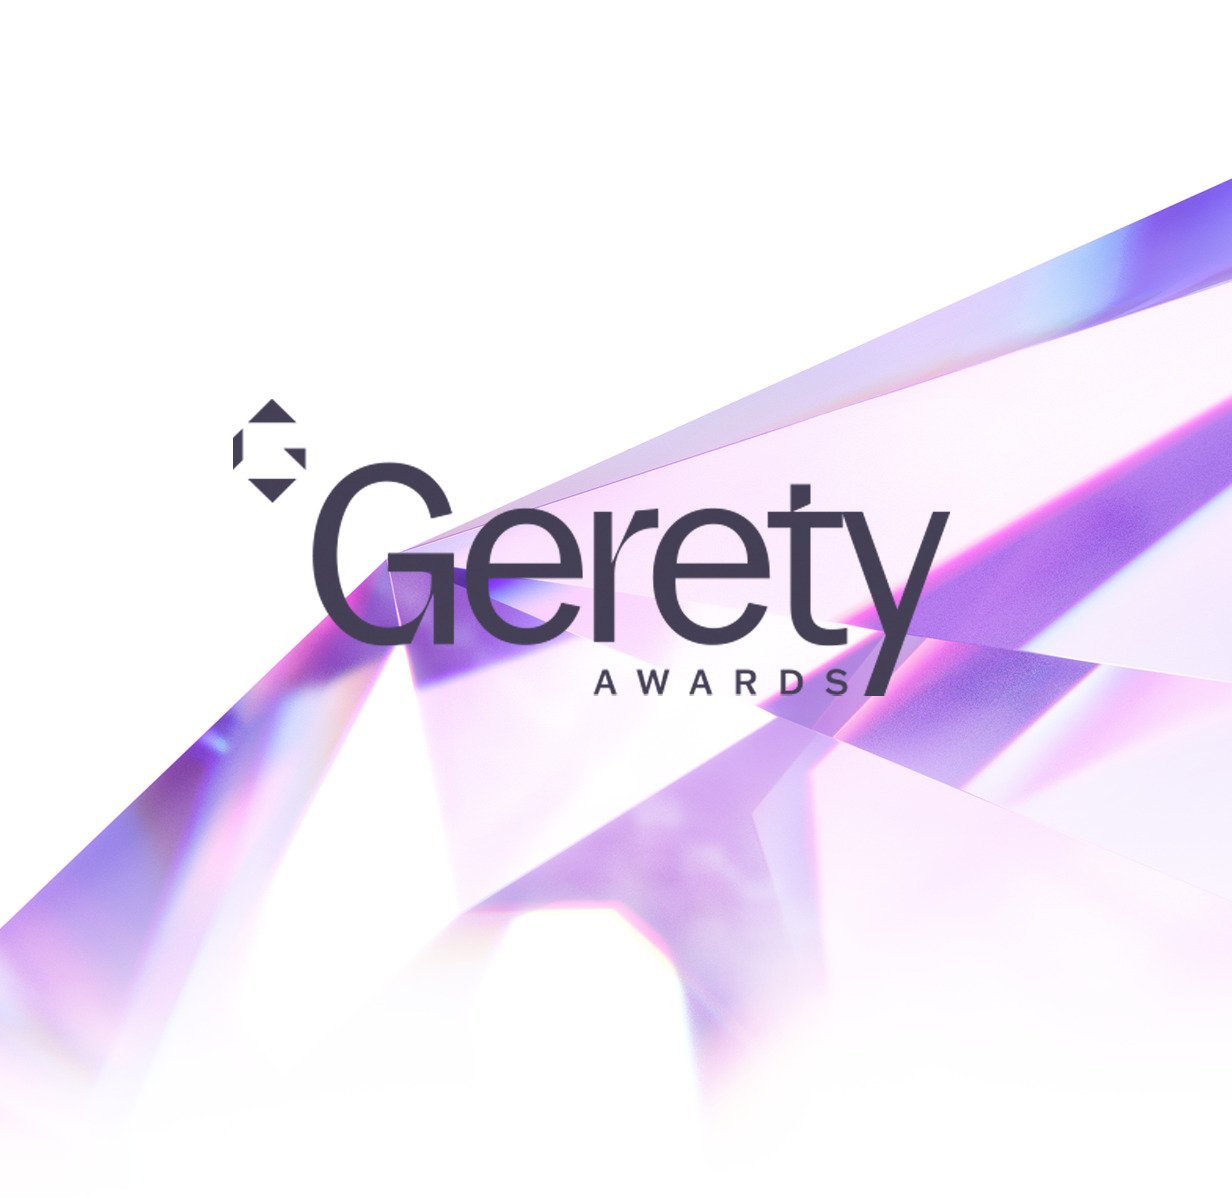 SCA announced as UK hosts of The Gerety Awards Judging session